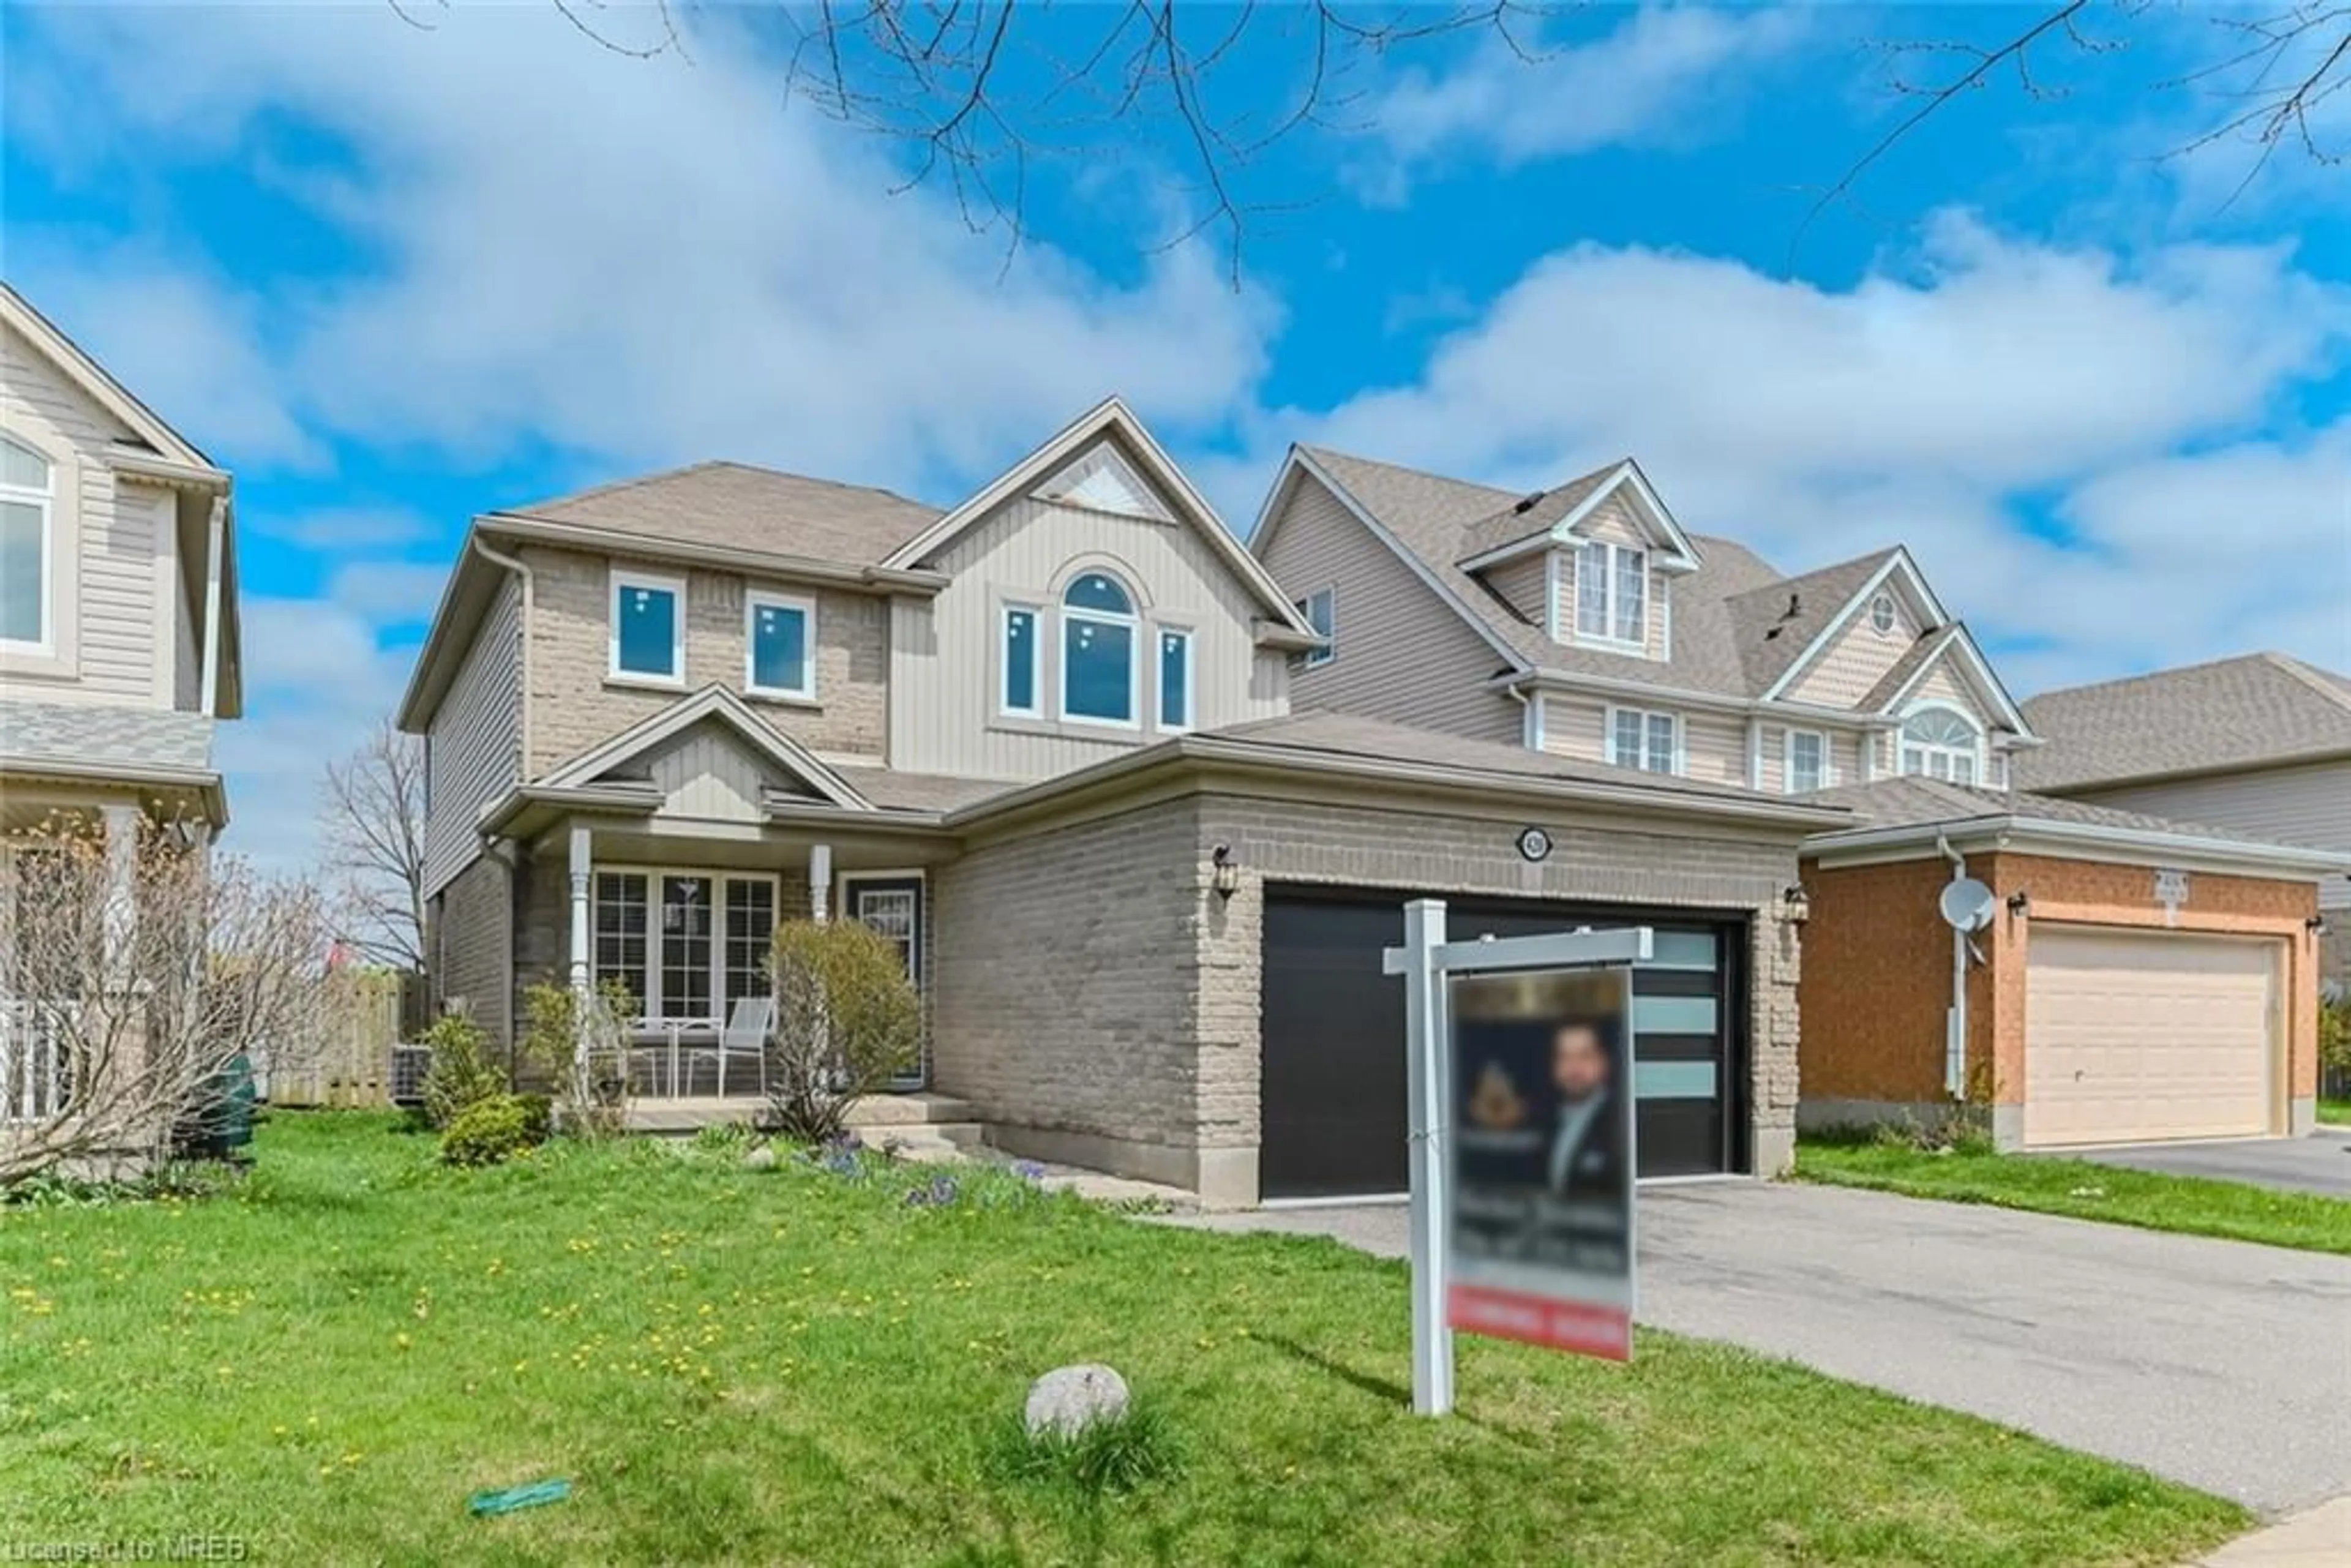 Frontside or backside of a home for 420 Newport Dr, Cambridge Ontario N3H 5S6